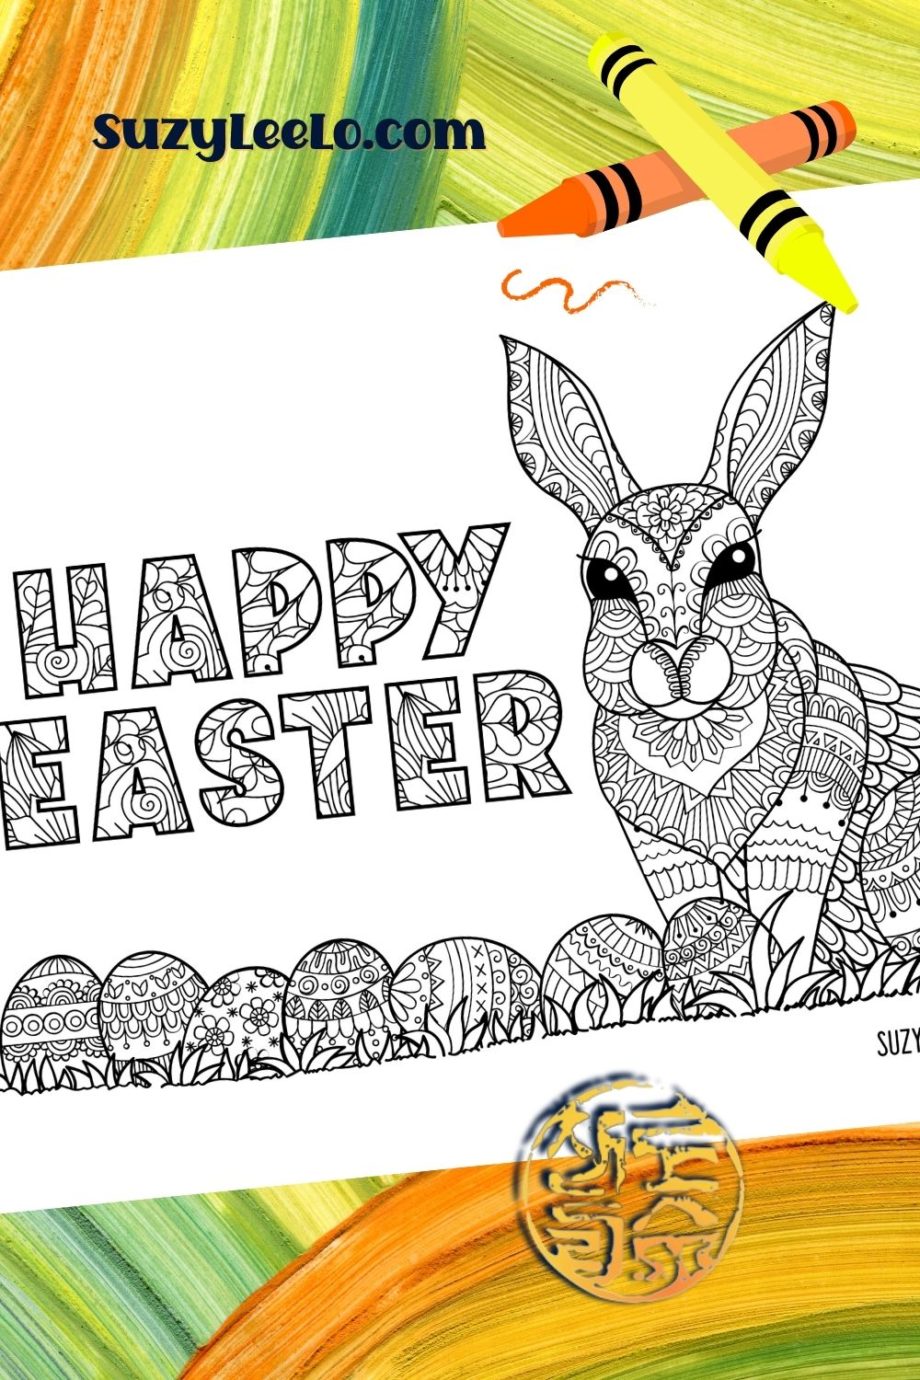 Happy Easter Coloring Page SuzyLeeLo